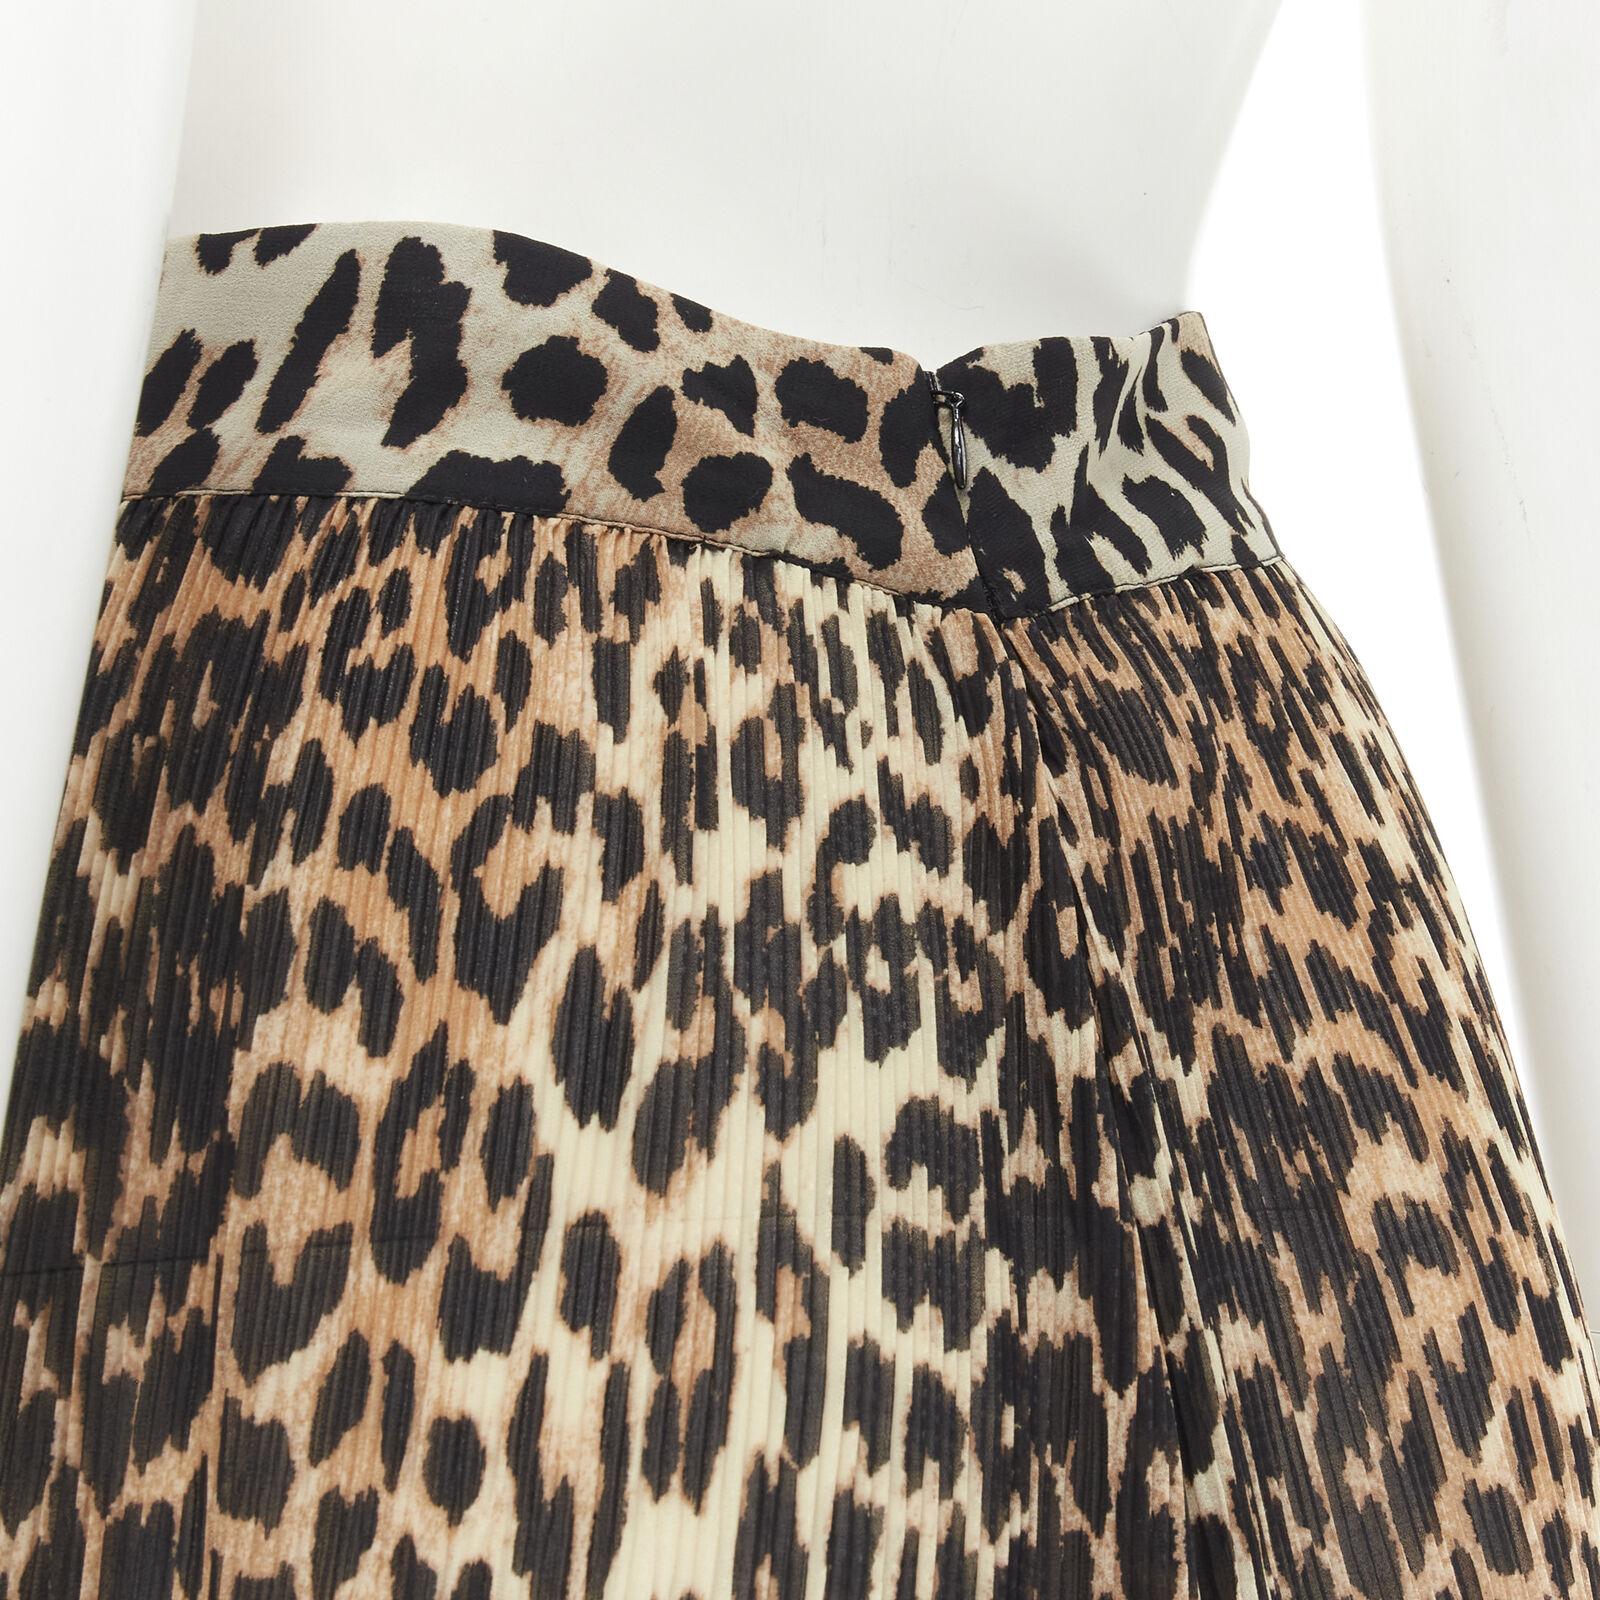 GANNI brown leopard print pleated full length skirt FR34 XS
Reference: LNKO/A01890
Brand: Ganni
Material: Polyester
Color: Brown
Pattern: Solid
Closure: Zip
Extra Details: Plisse skirt
Made in: India

CONDITION:
Condition: Excellent, this item was